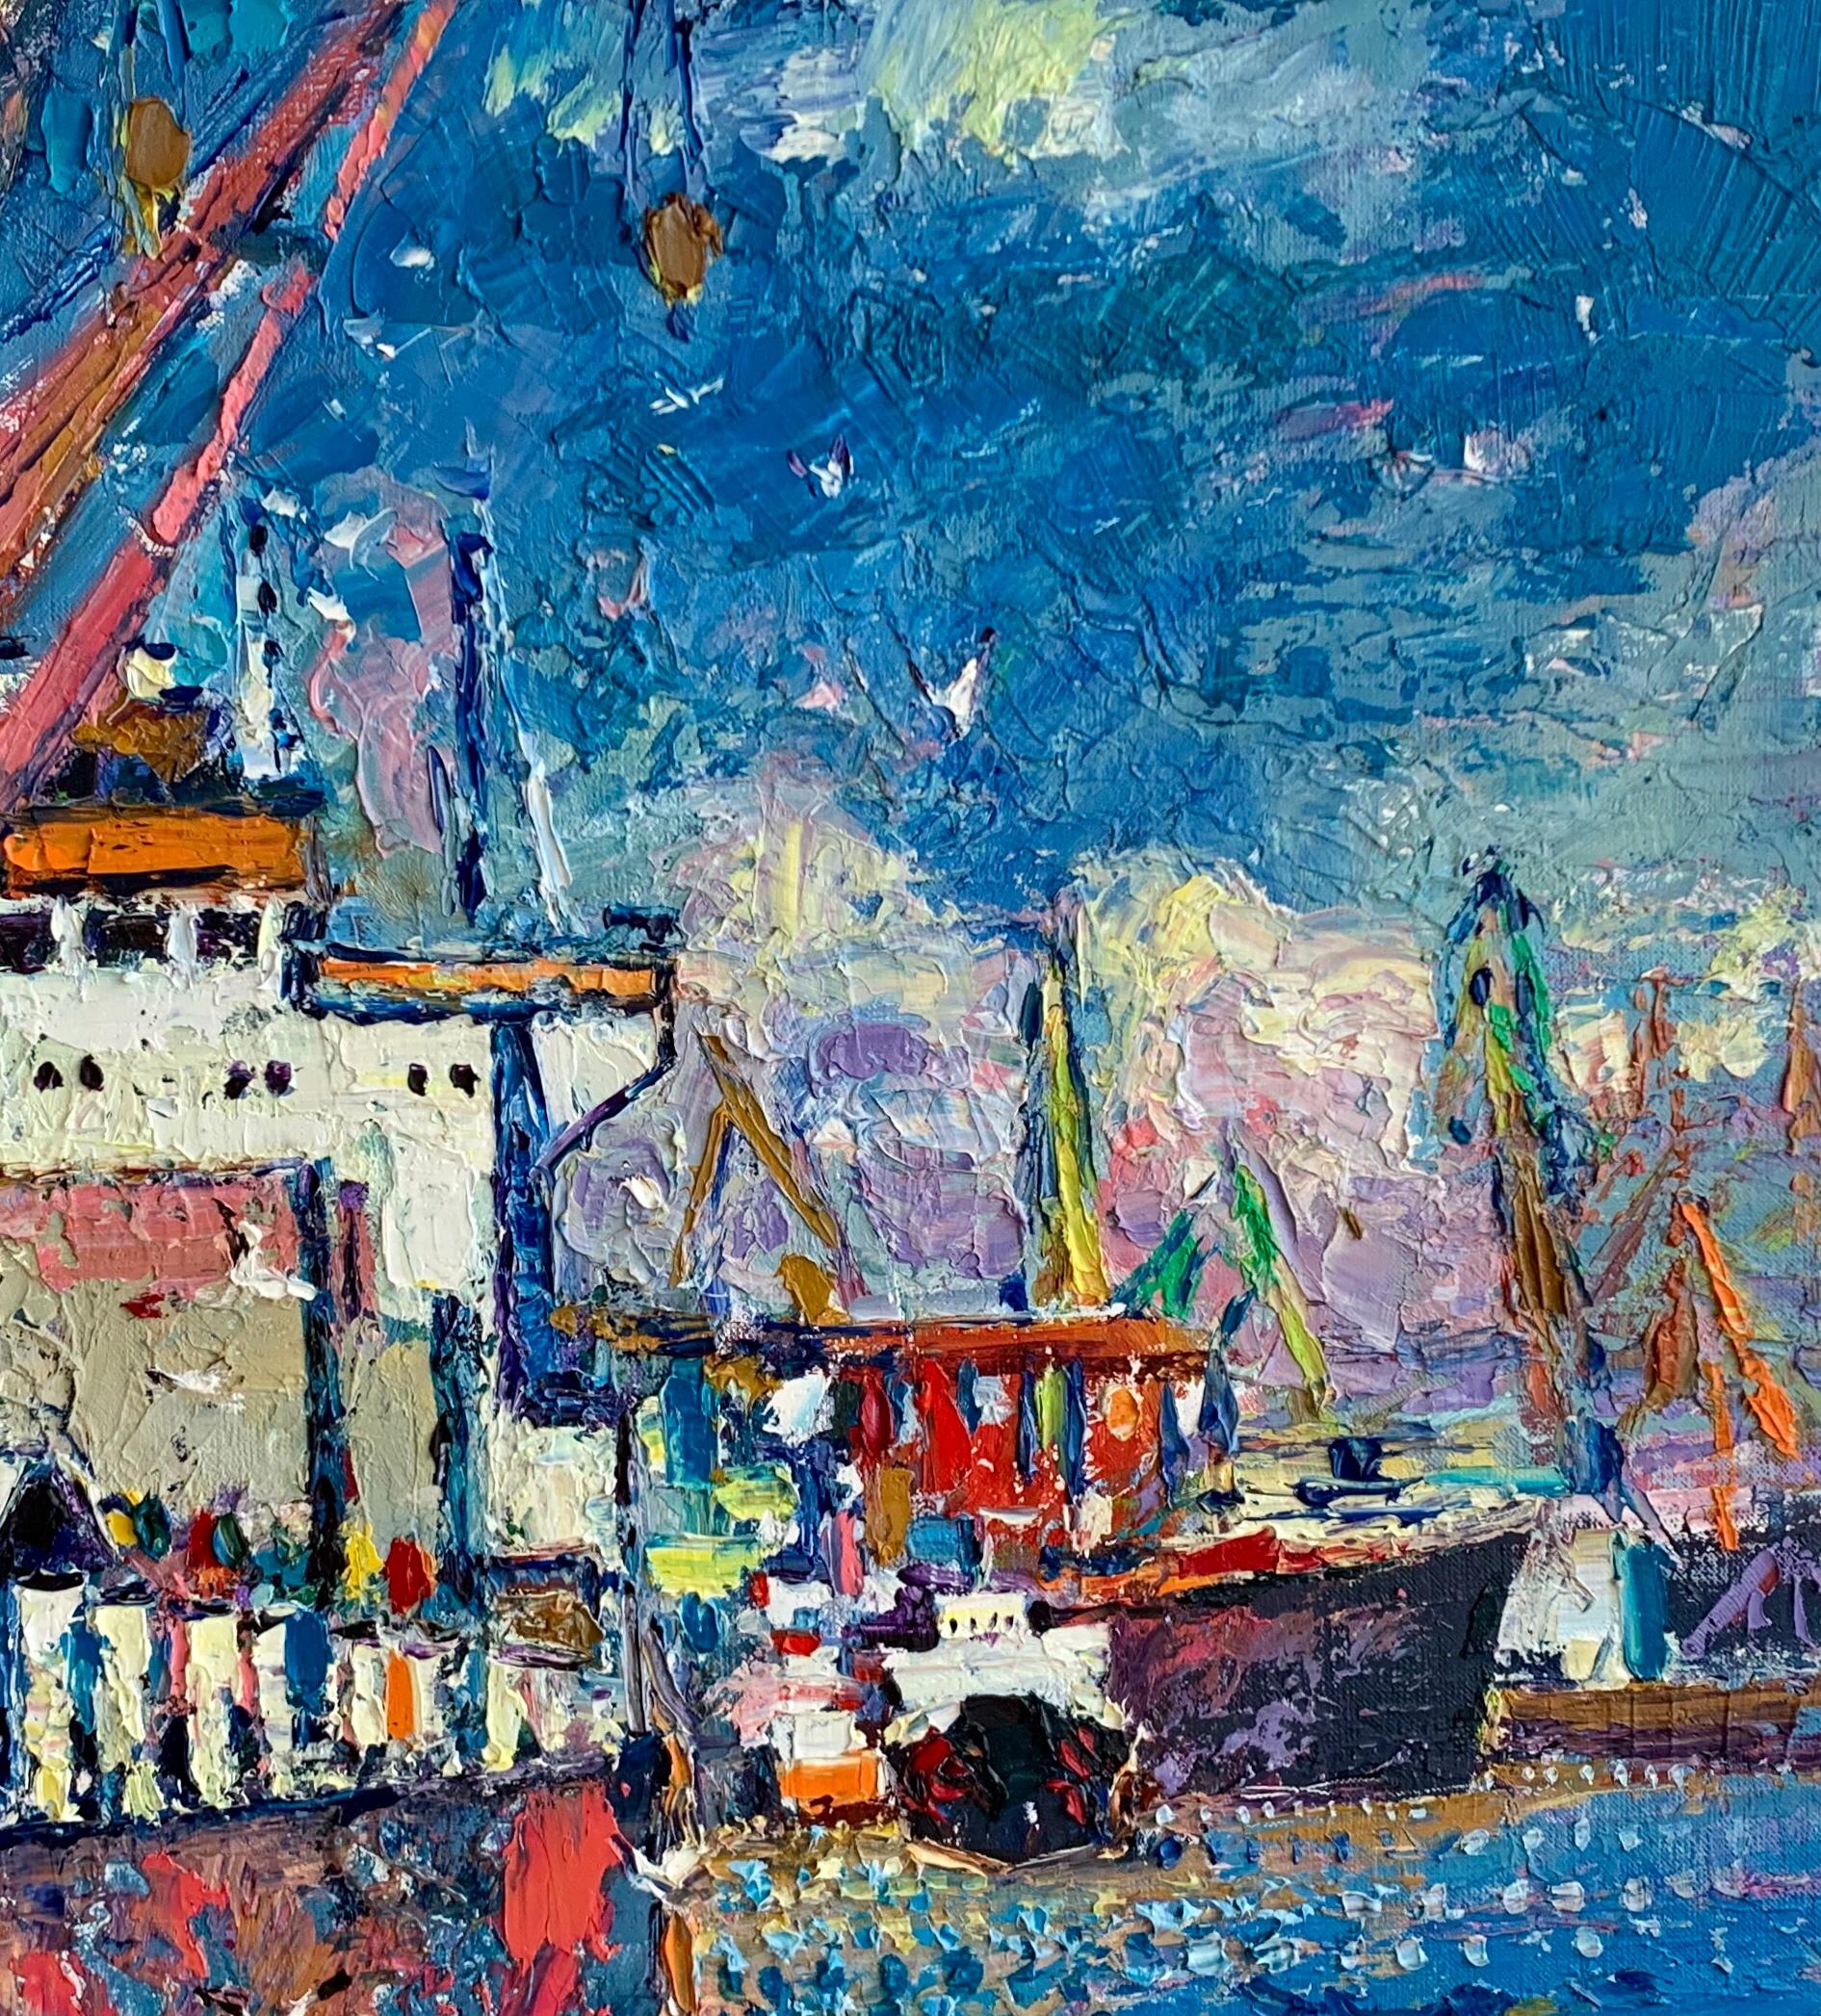 Modern Industrial Art Sea Port Landscape Oil Canvas Painting by Chebotaru A.
This is a contemporary original artwork by a well known Ukrainian artist Andrey Chebotaru (born in 1984). 
This piece of art was painted in 2020 in Odessa, Ukraine, and was